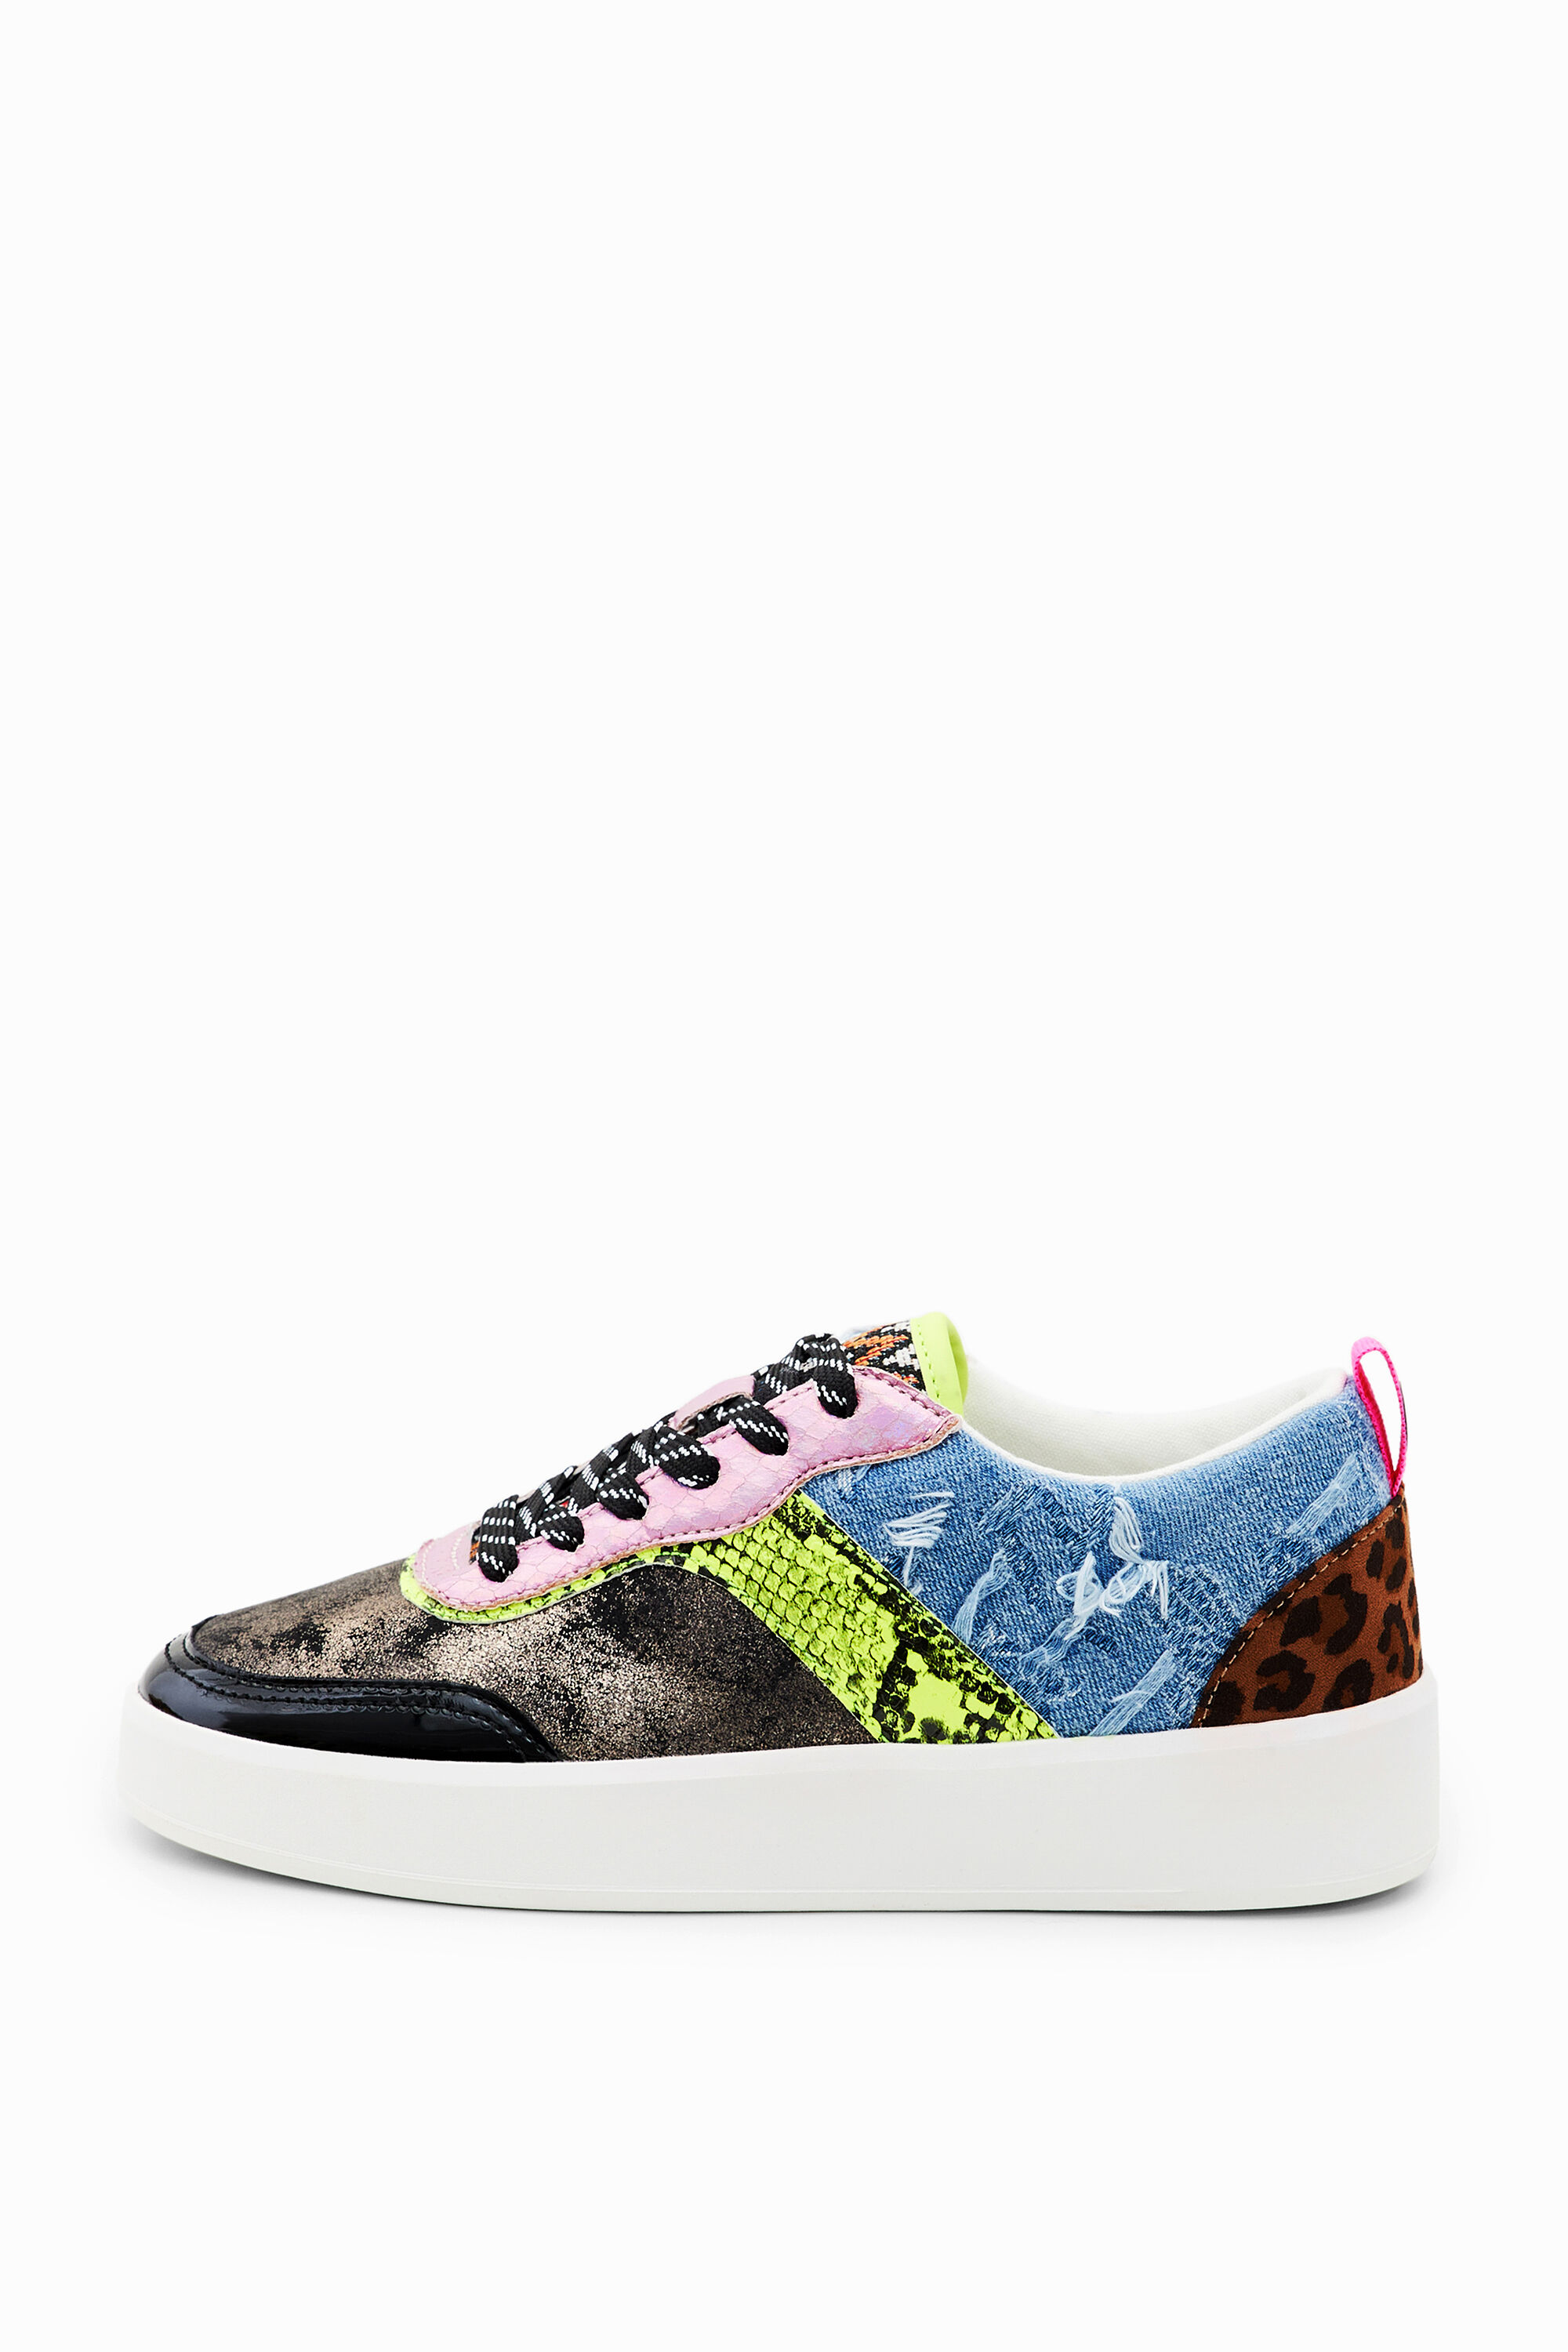 Patchwork sneakers - MATERIAL FINISHES - 36